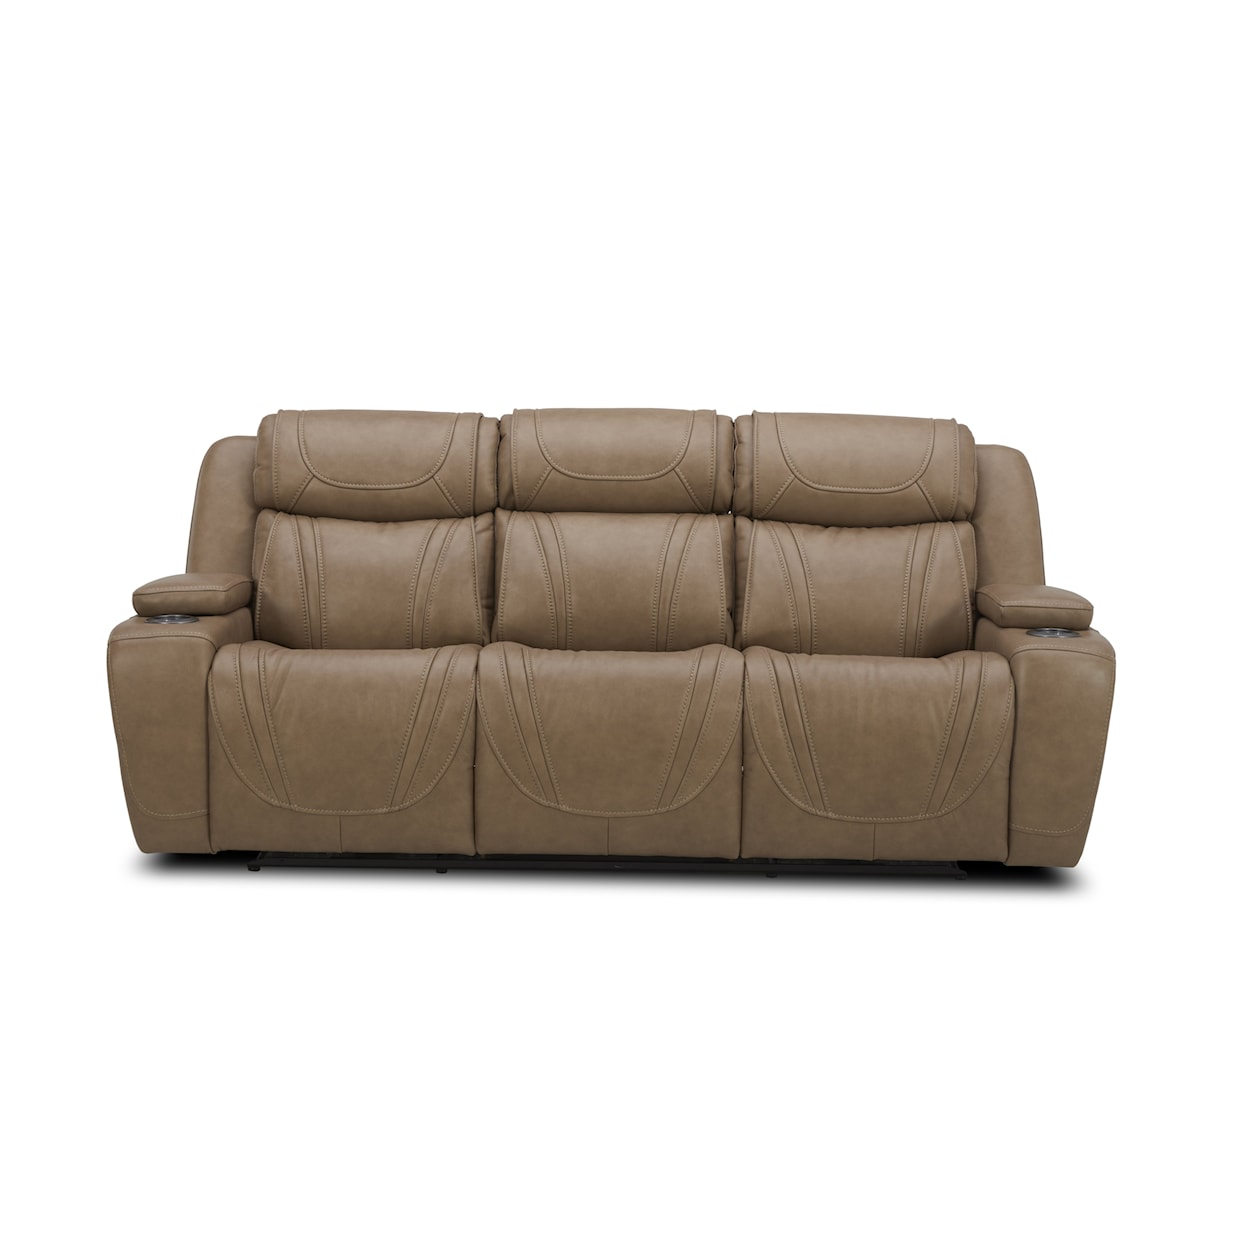 Kuka Home 615 Transformer Leather Collection 6155 Sand Leather Dual Power Sofa